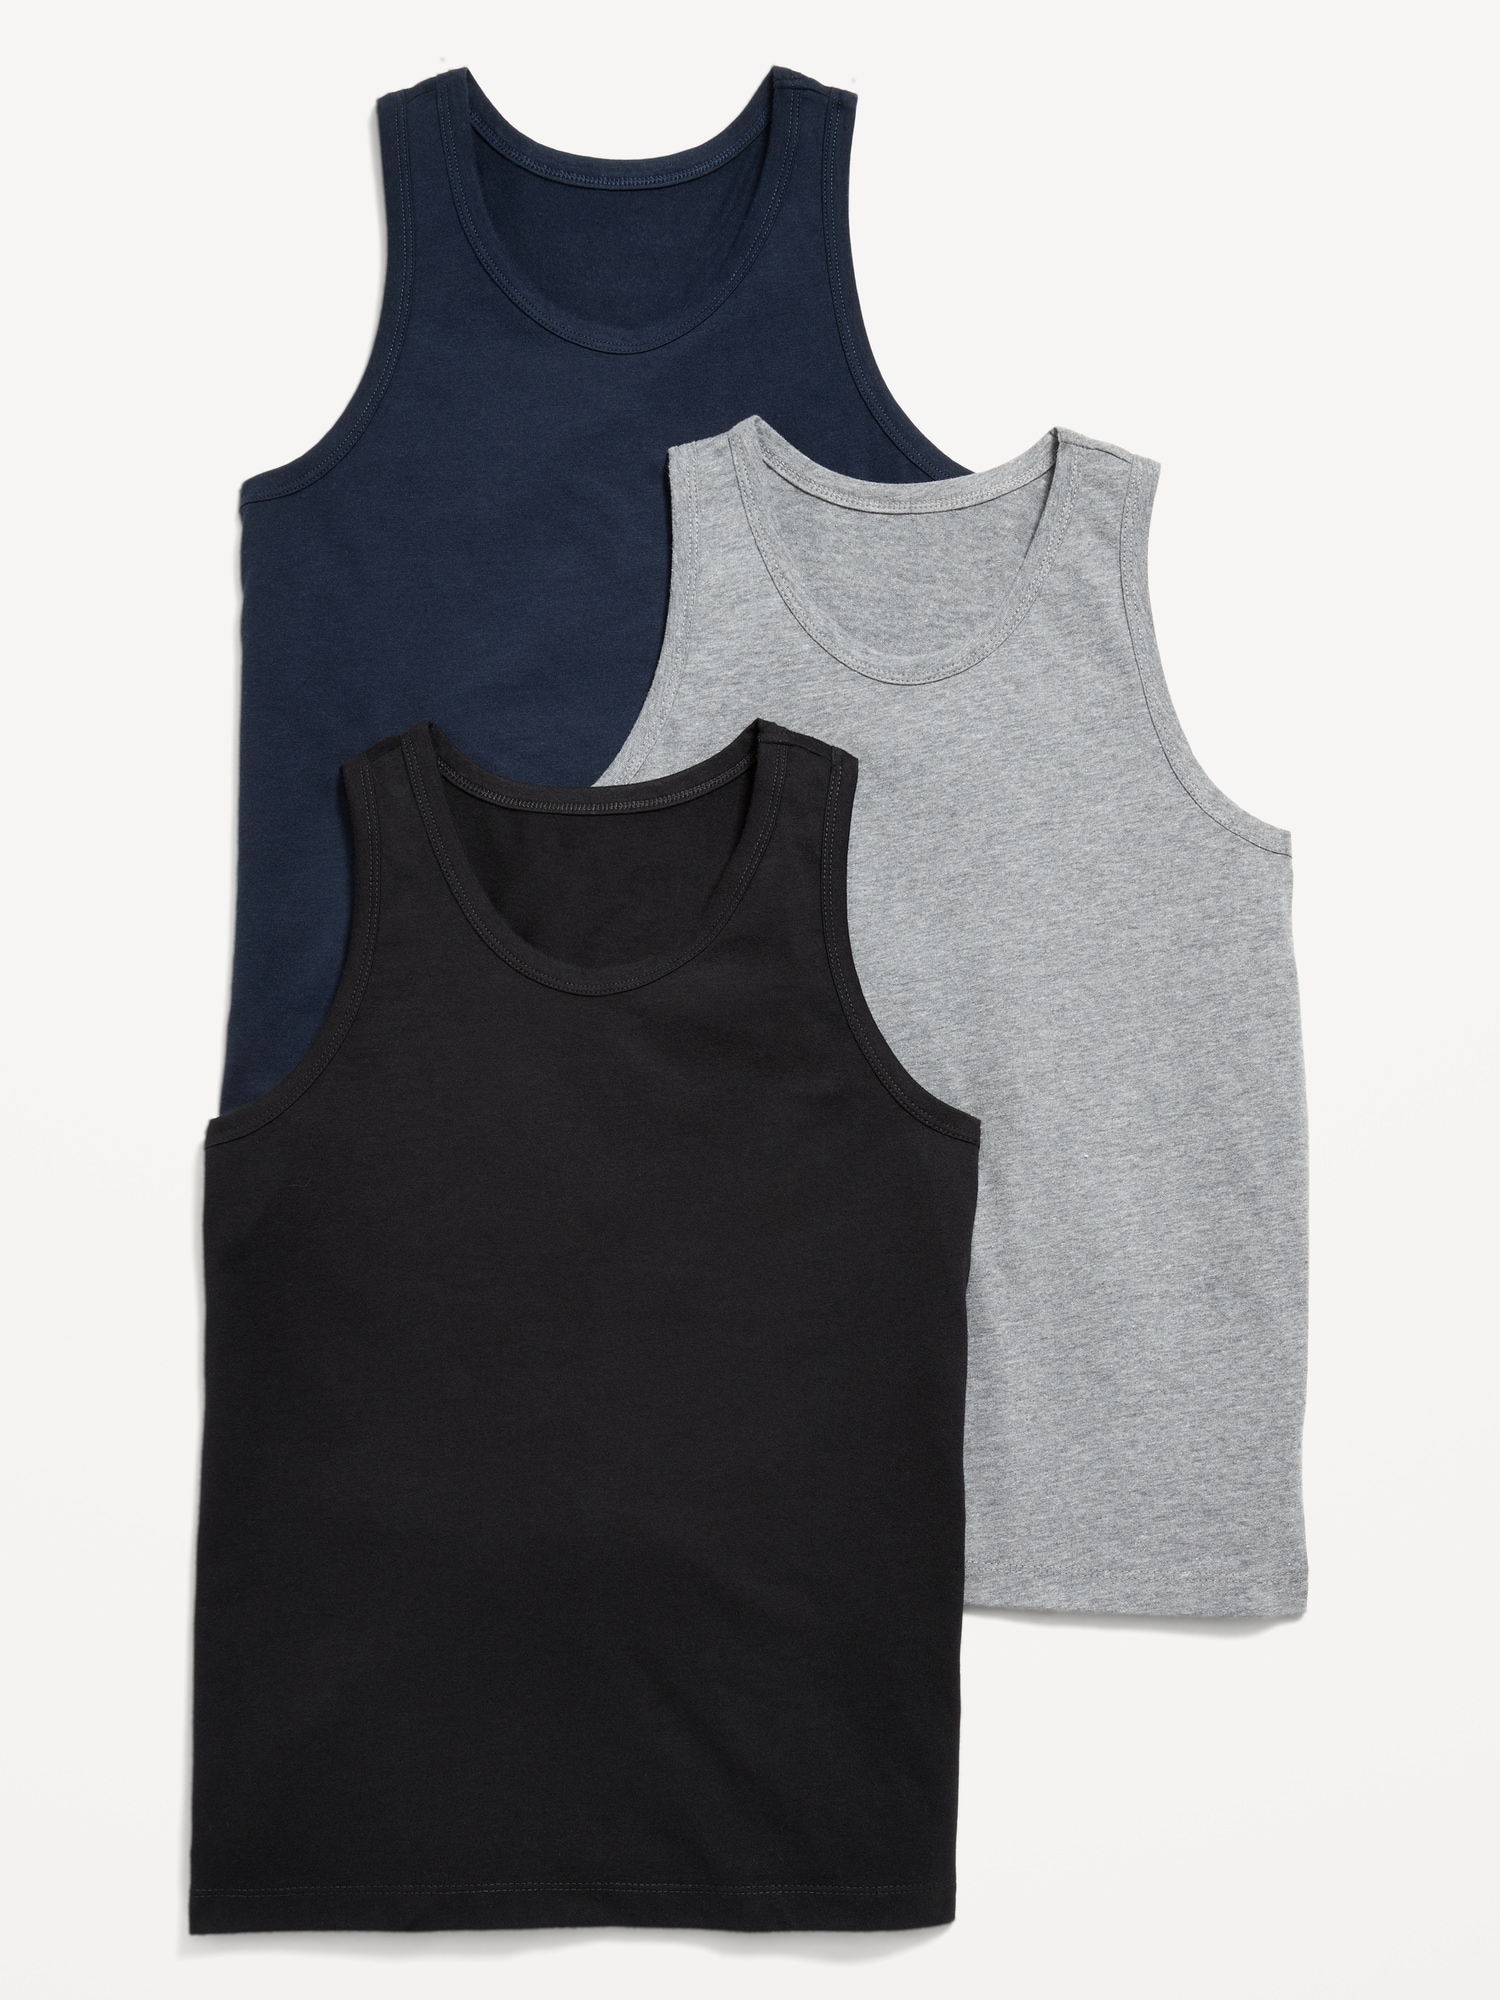 Softest Tank Tops 3-Pack for Boys